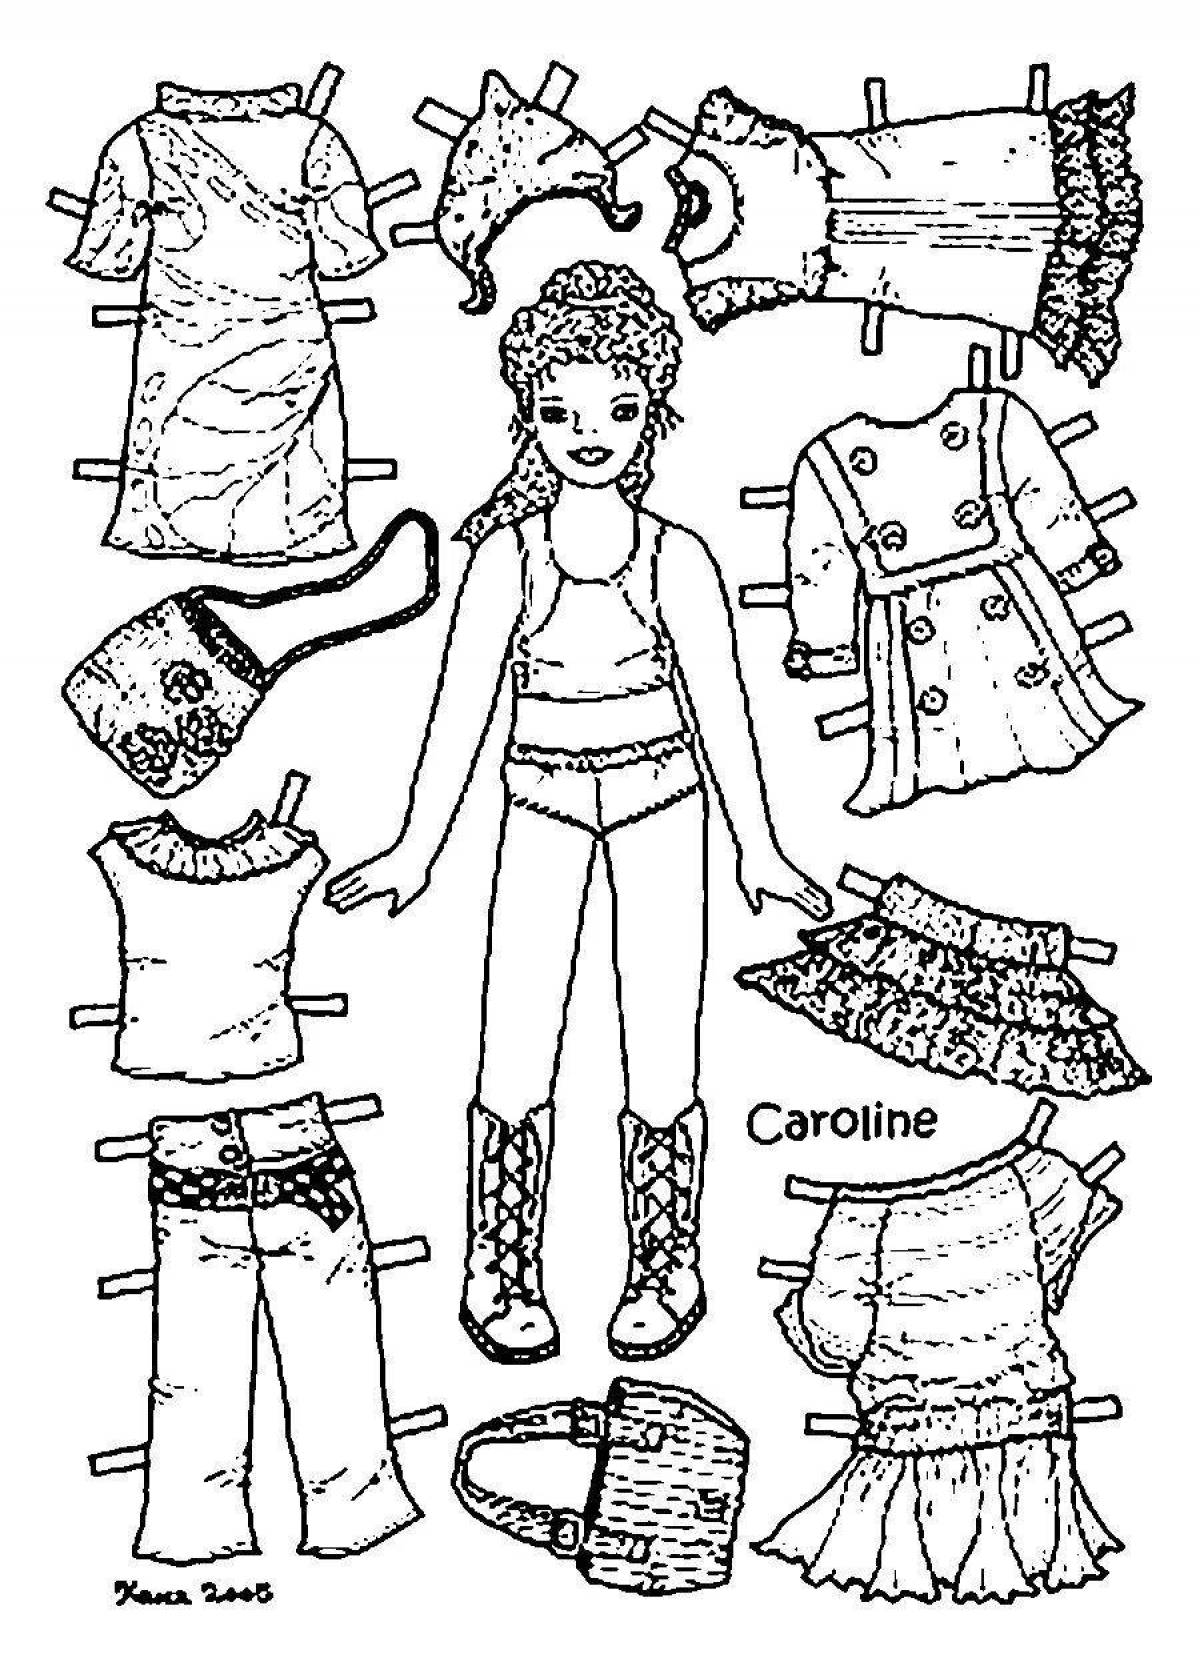 Glamorous coloring pages animals in clothes